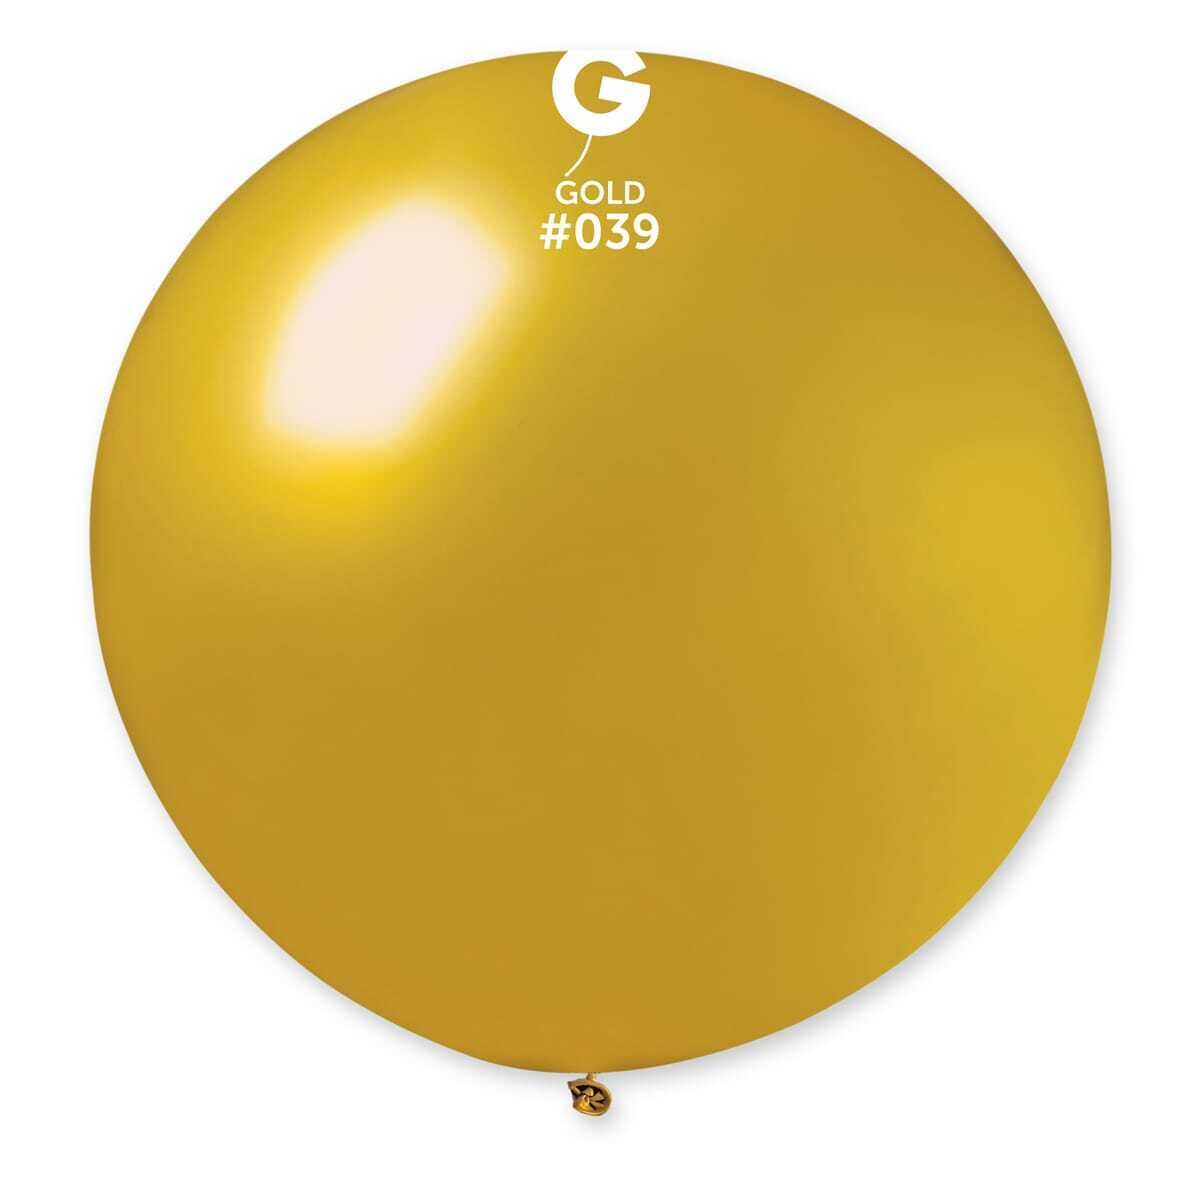 GM30: #039 Gold 329995 Metallic Color 31 in